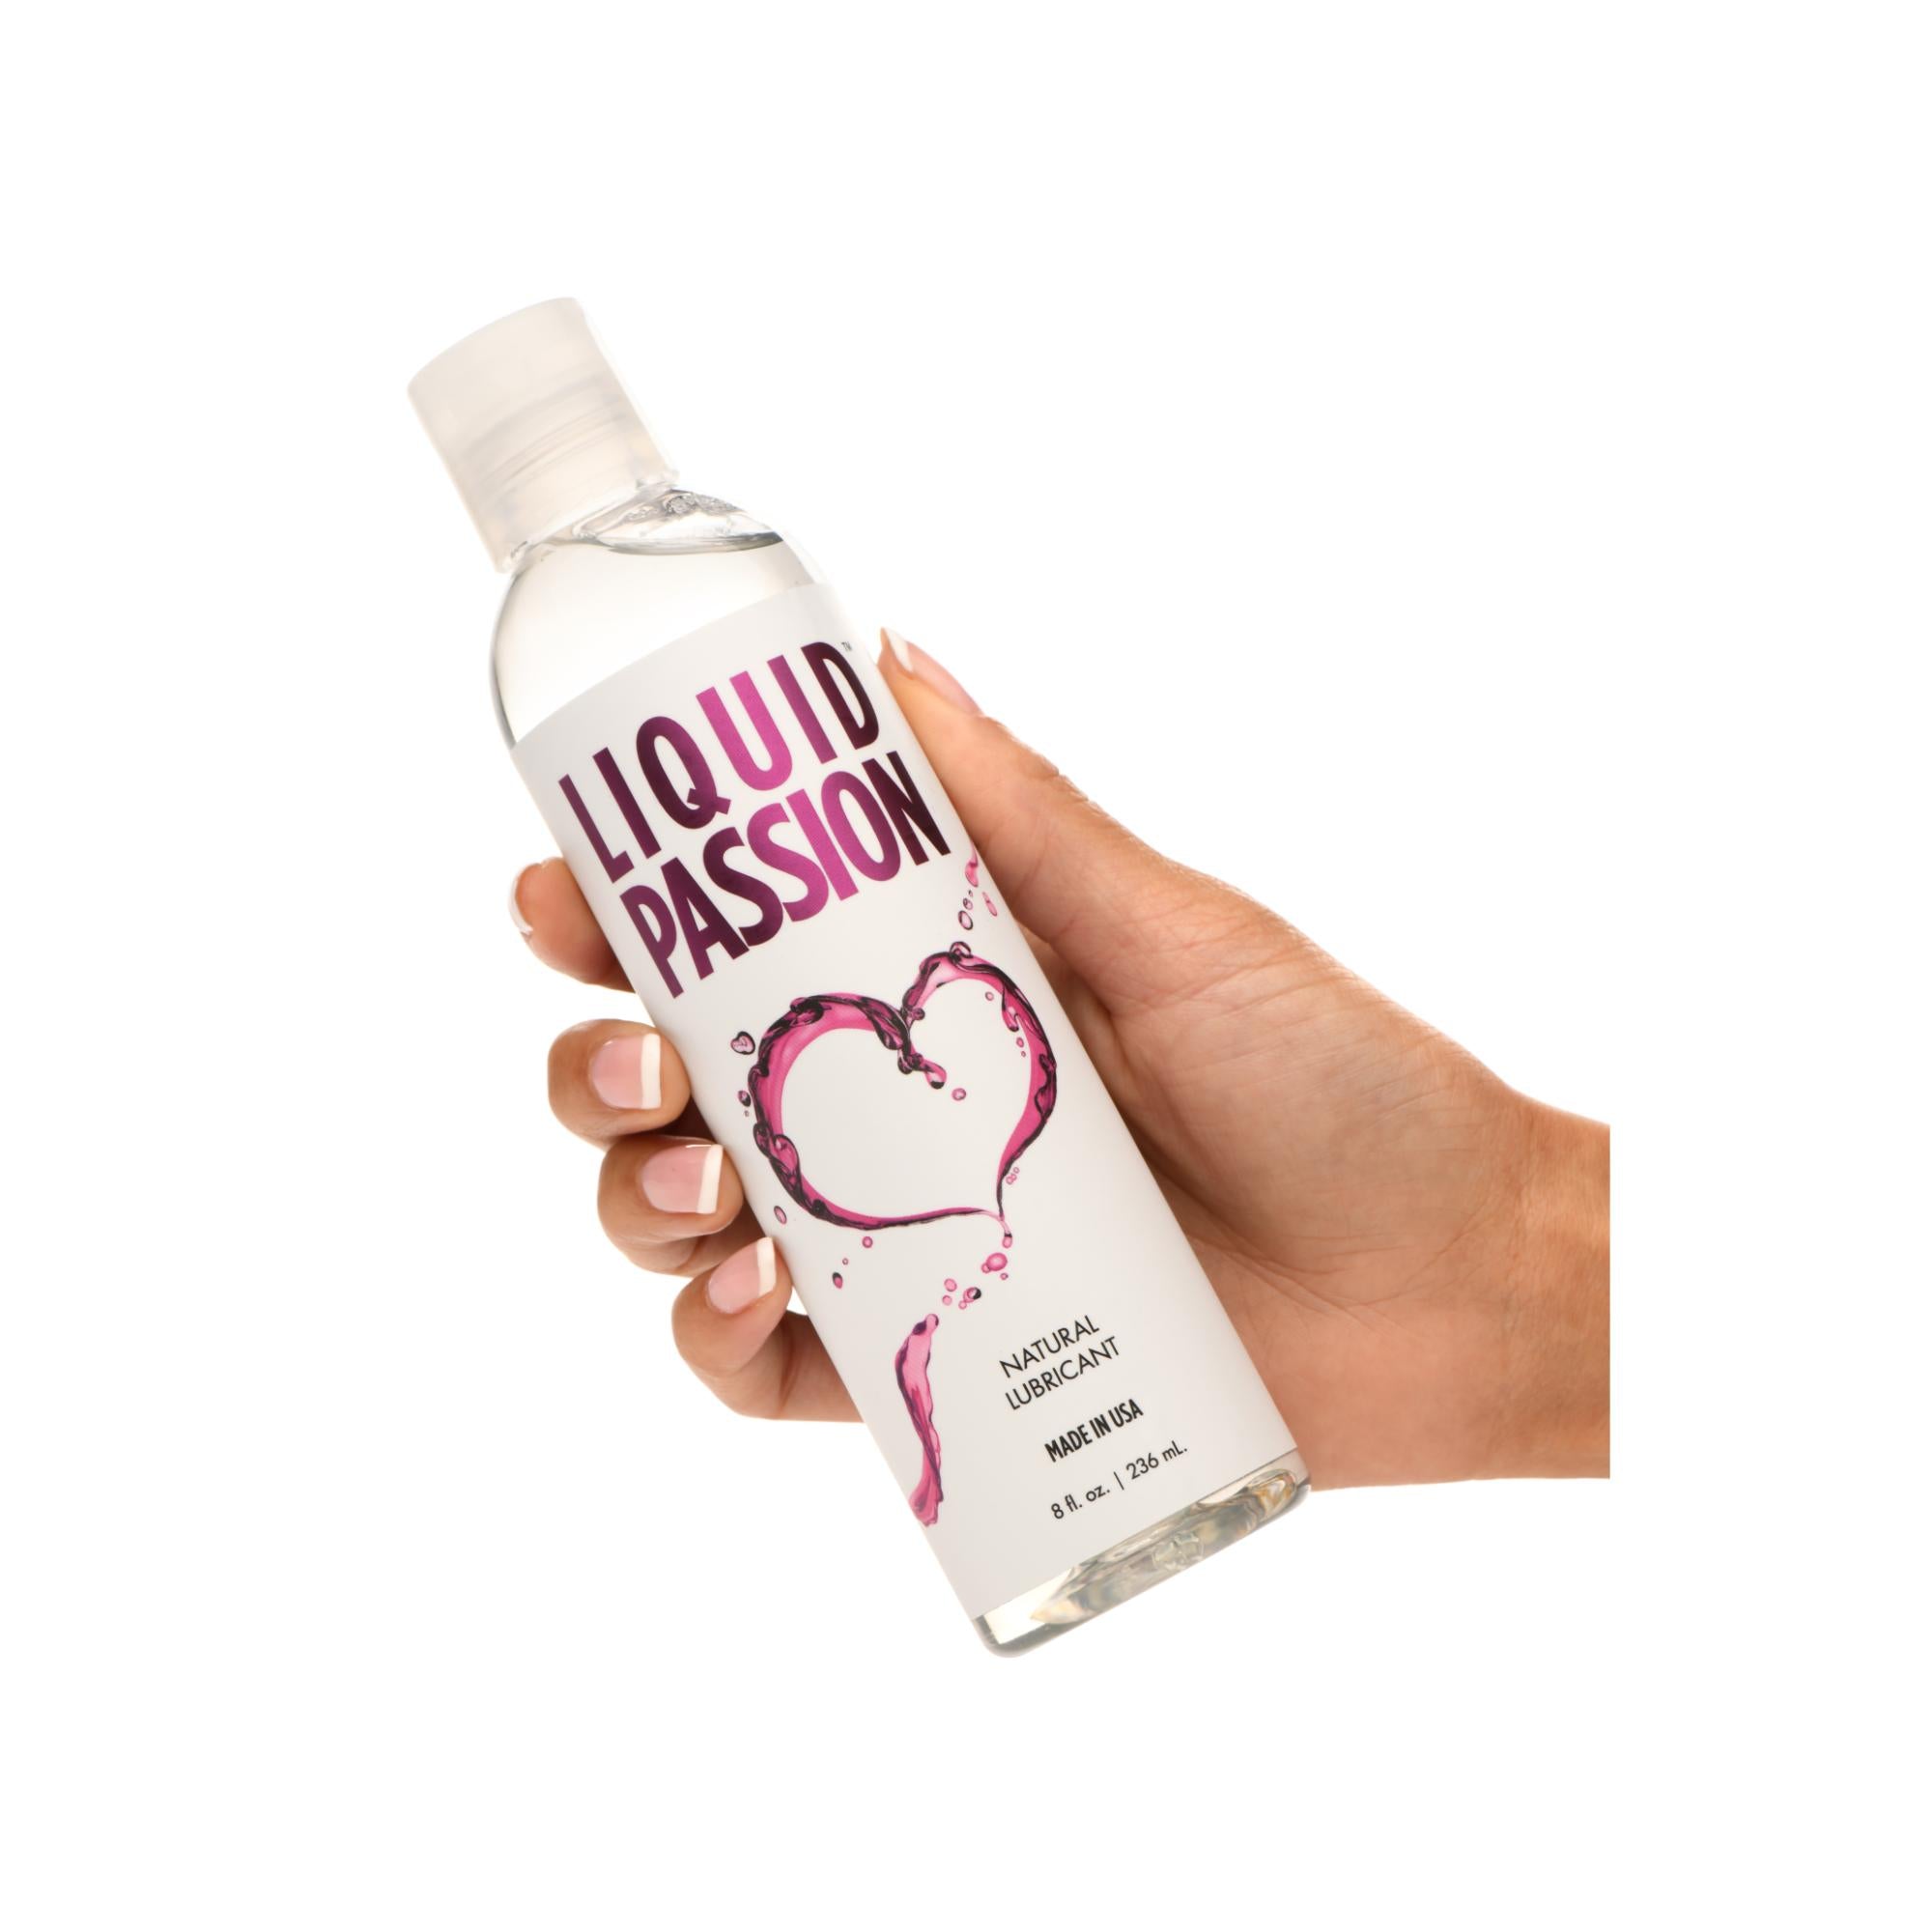 Passion Lubricants Liquid Passion Natural Lubricant